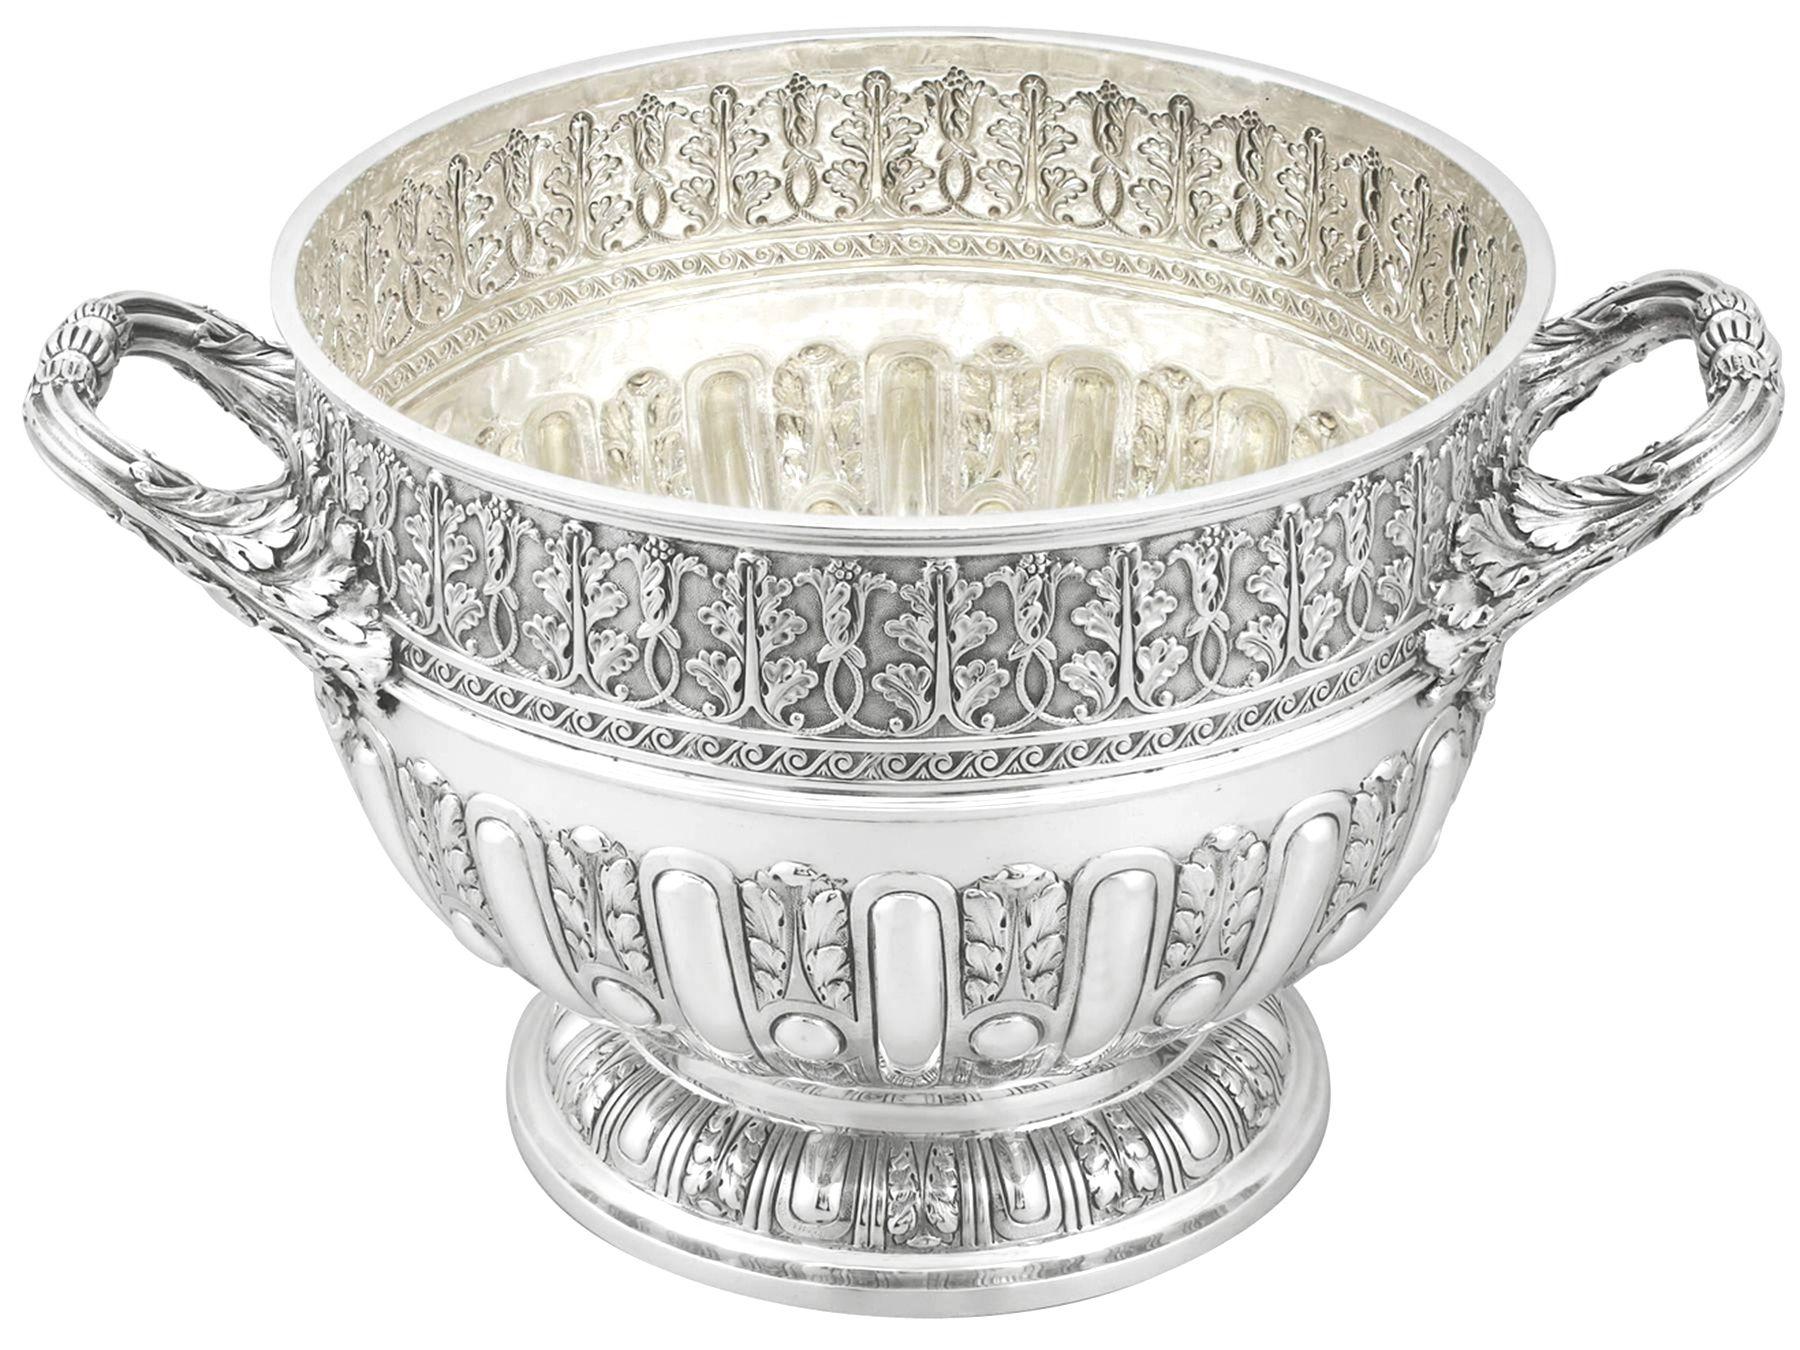 A magnificent, fine and impressive antique Victorian English sterling silver presentation bowl; an addition to our ornamental silverware collection.

This magnificent antique Victorian sterling silver bowl has a circular rounded form onto a